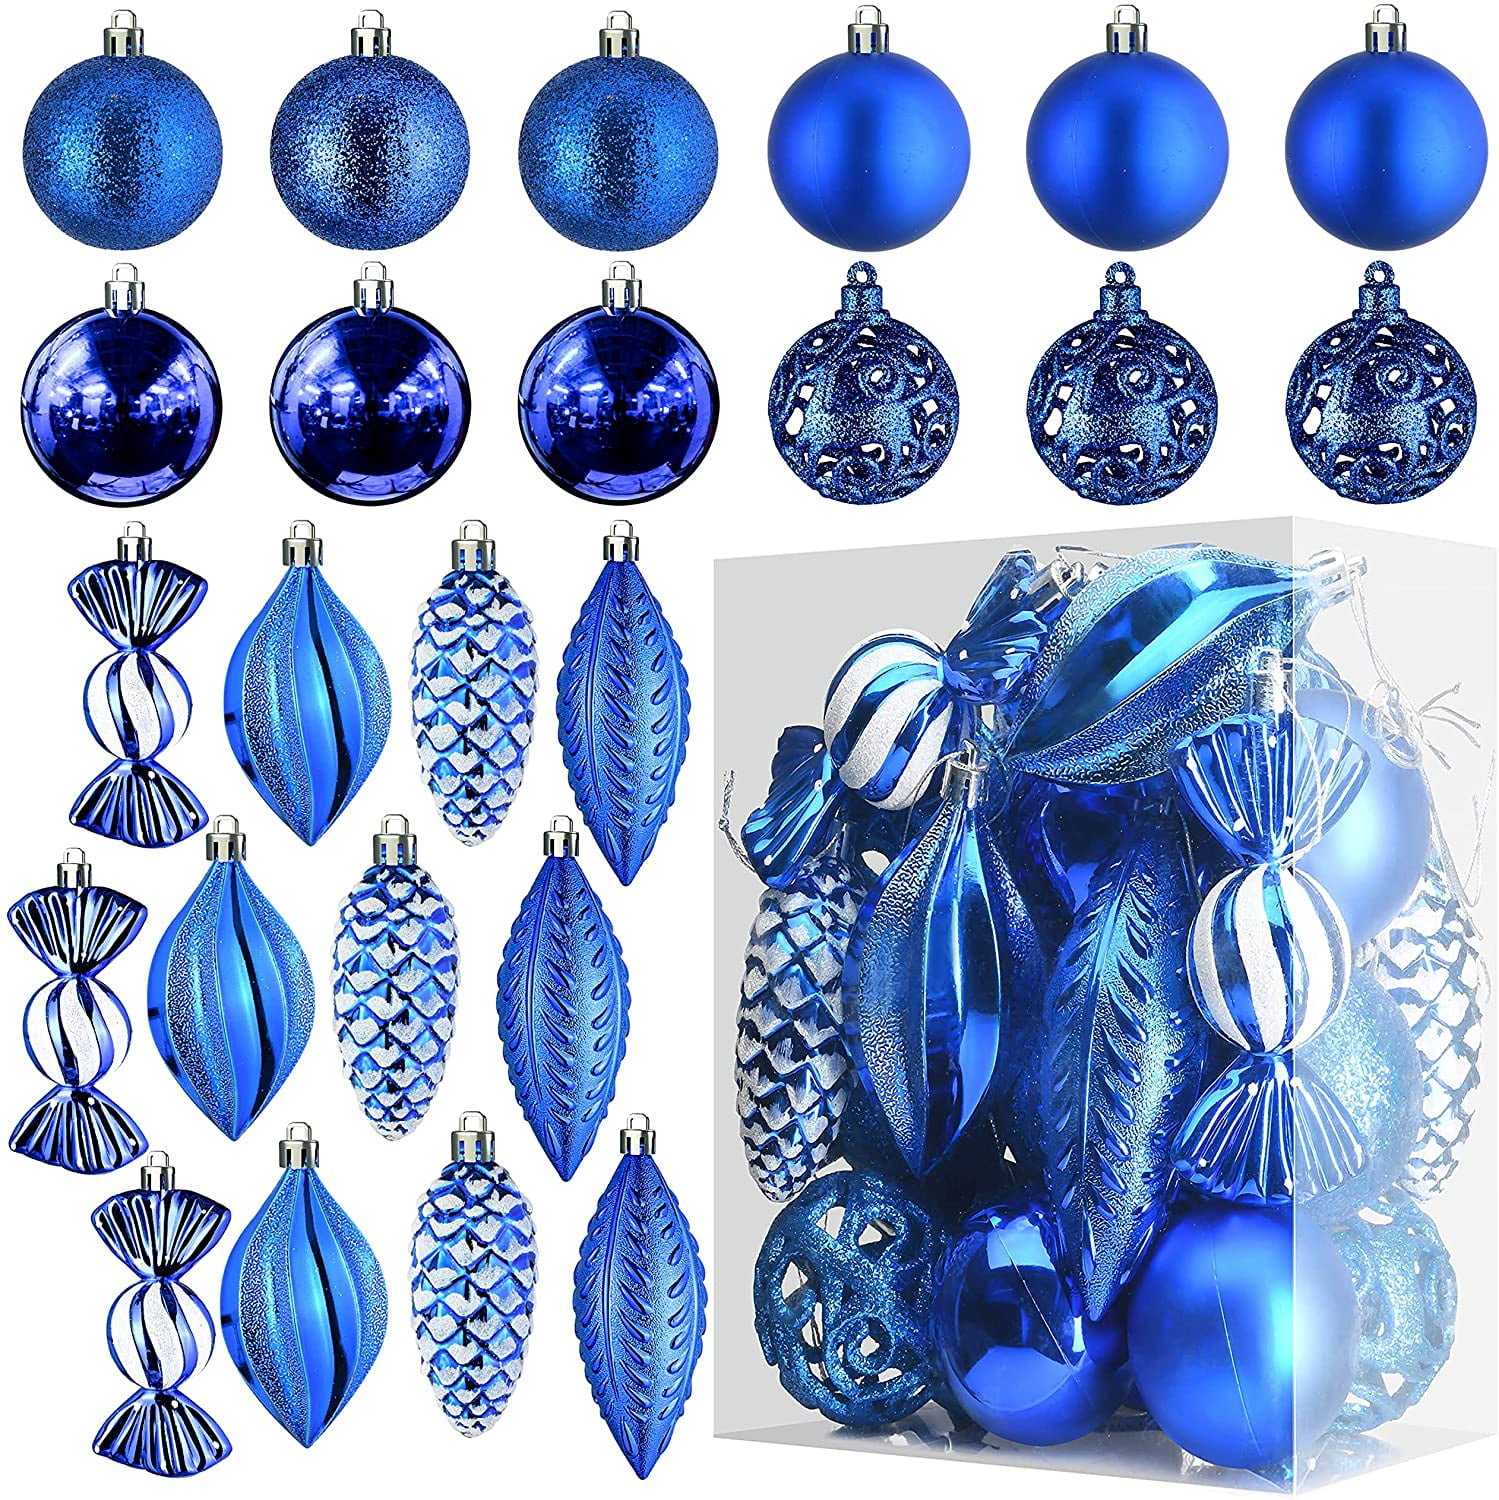 Blue Christmas Ball Ornaments for Christams Decorations - 24 Pieces ...